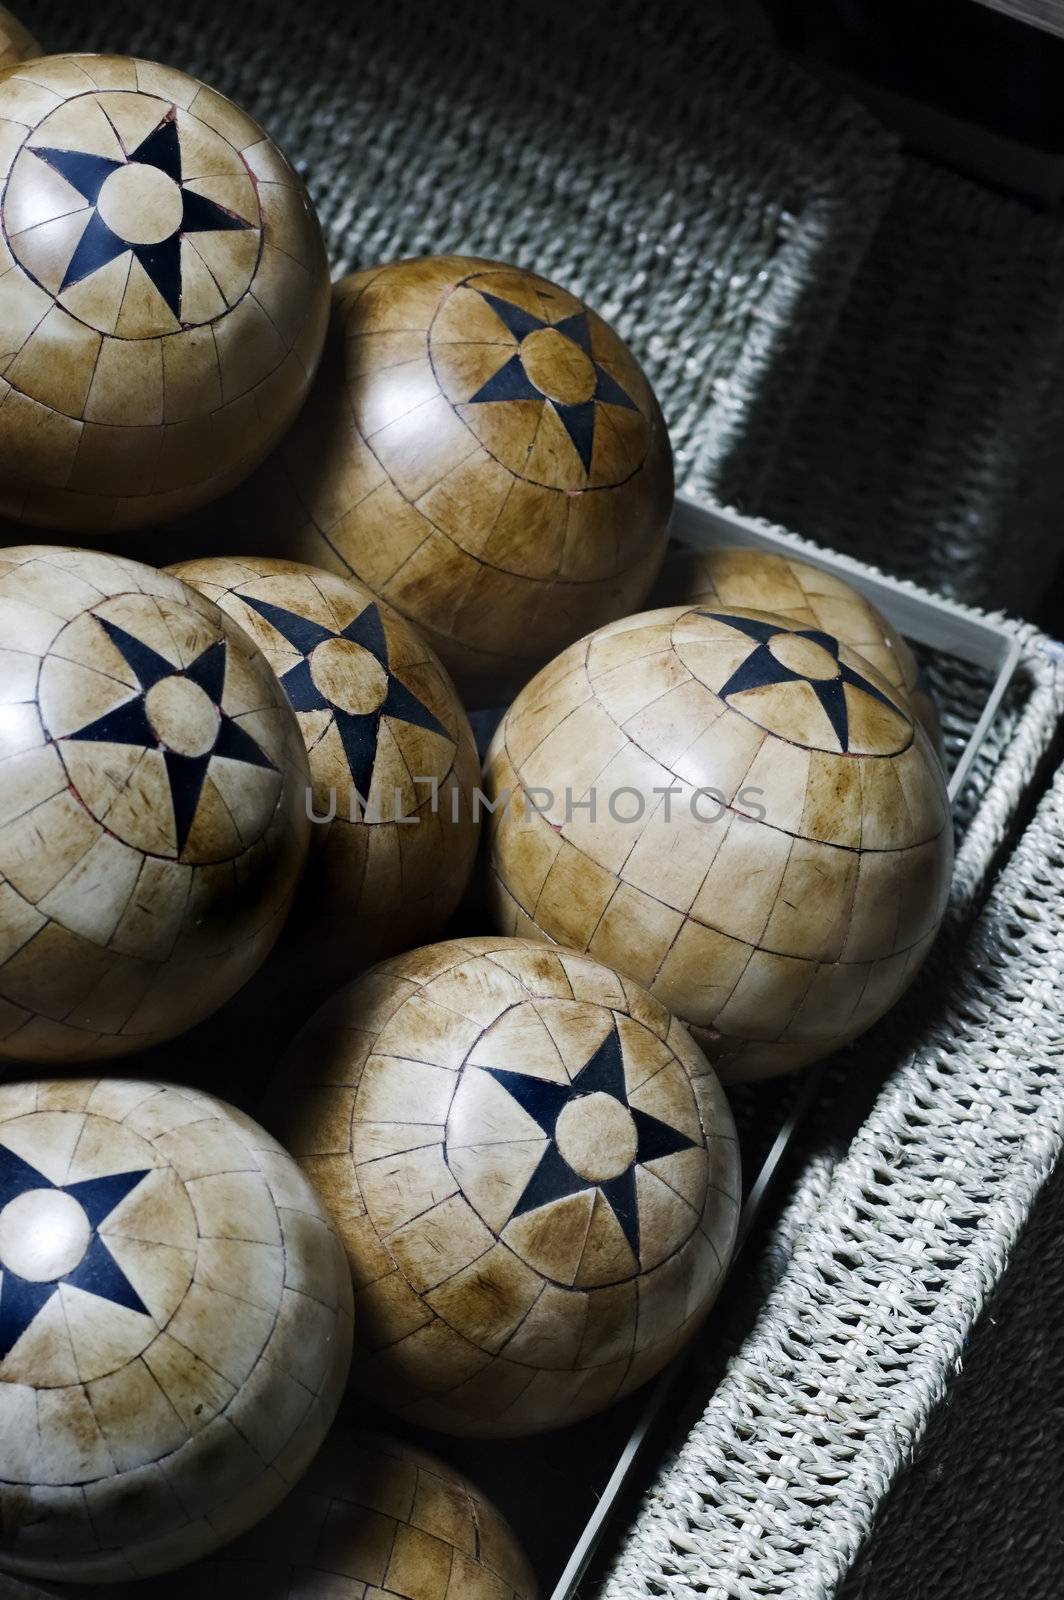 Decorative woos balls with five pointed stars in a basket